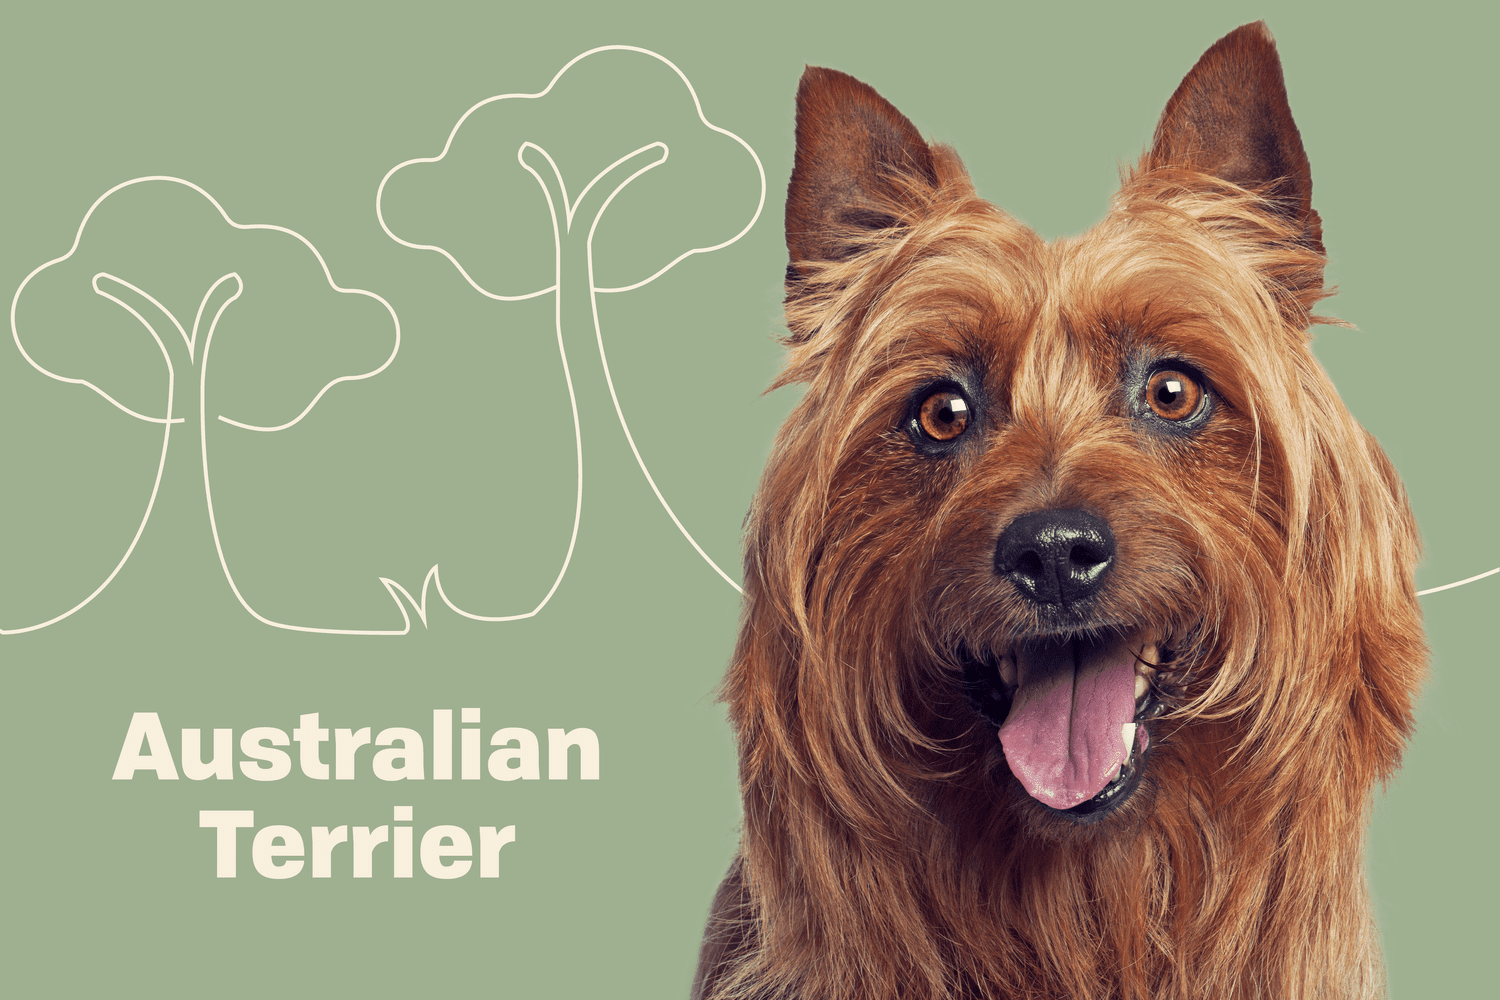 Australian Terrier Dog Breed Information and Characteristics | Daily Paws